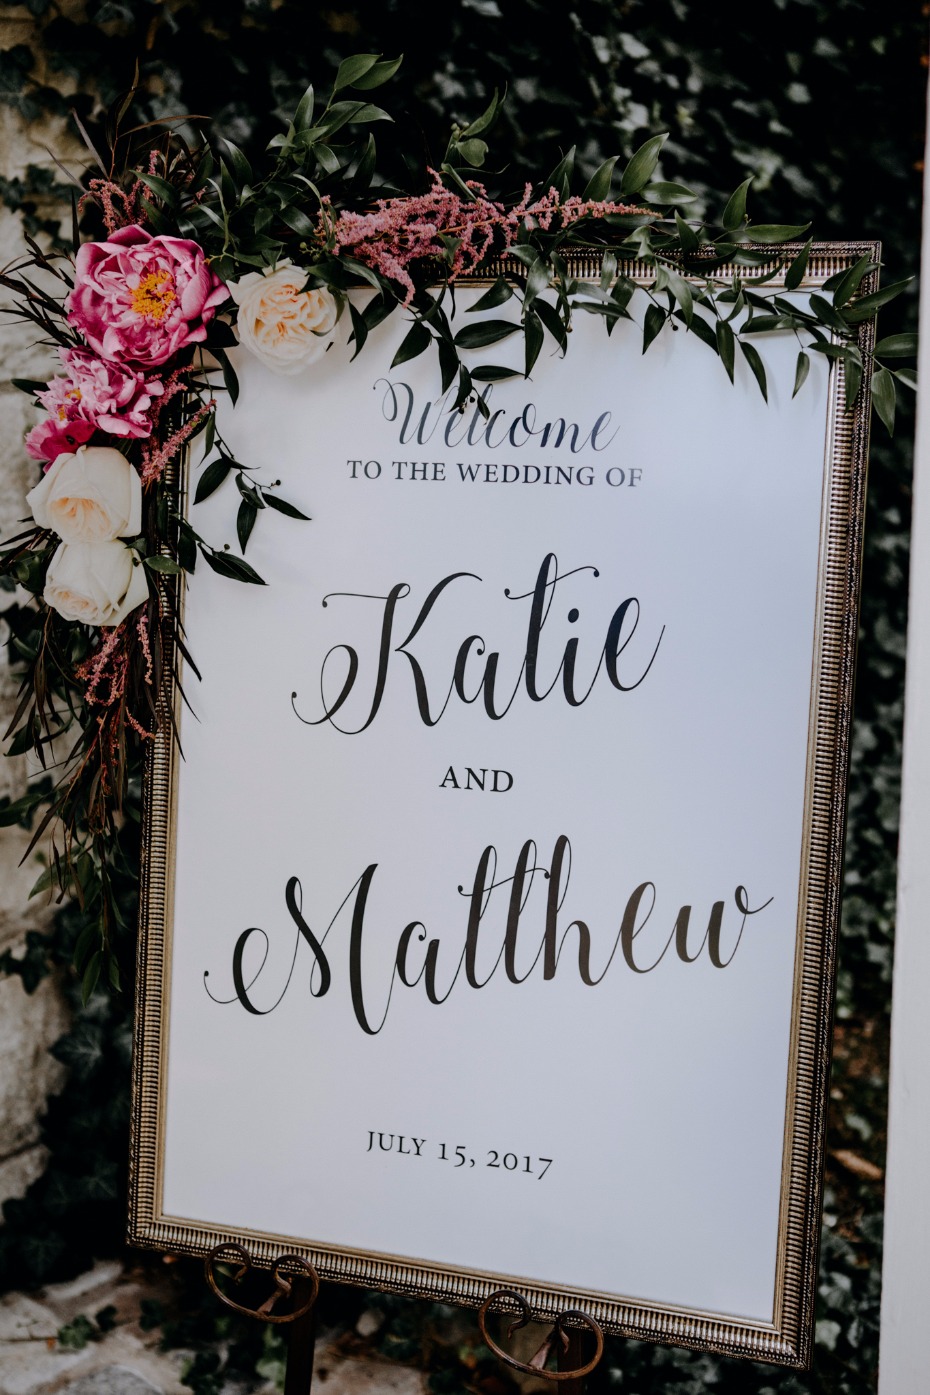 Chic welcome wedding sign